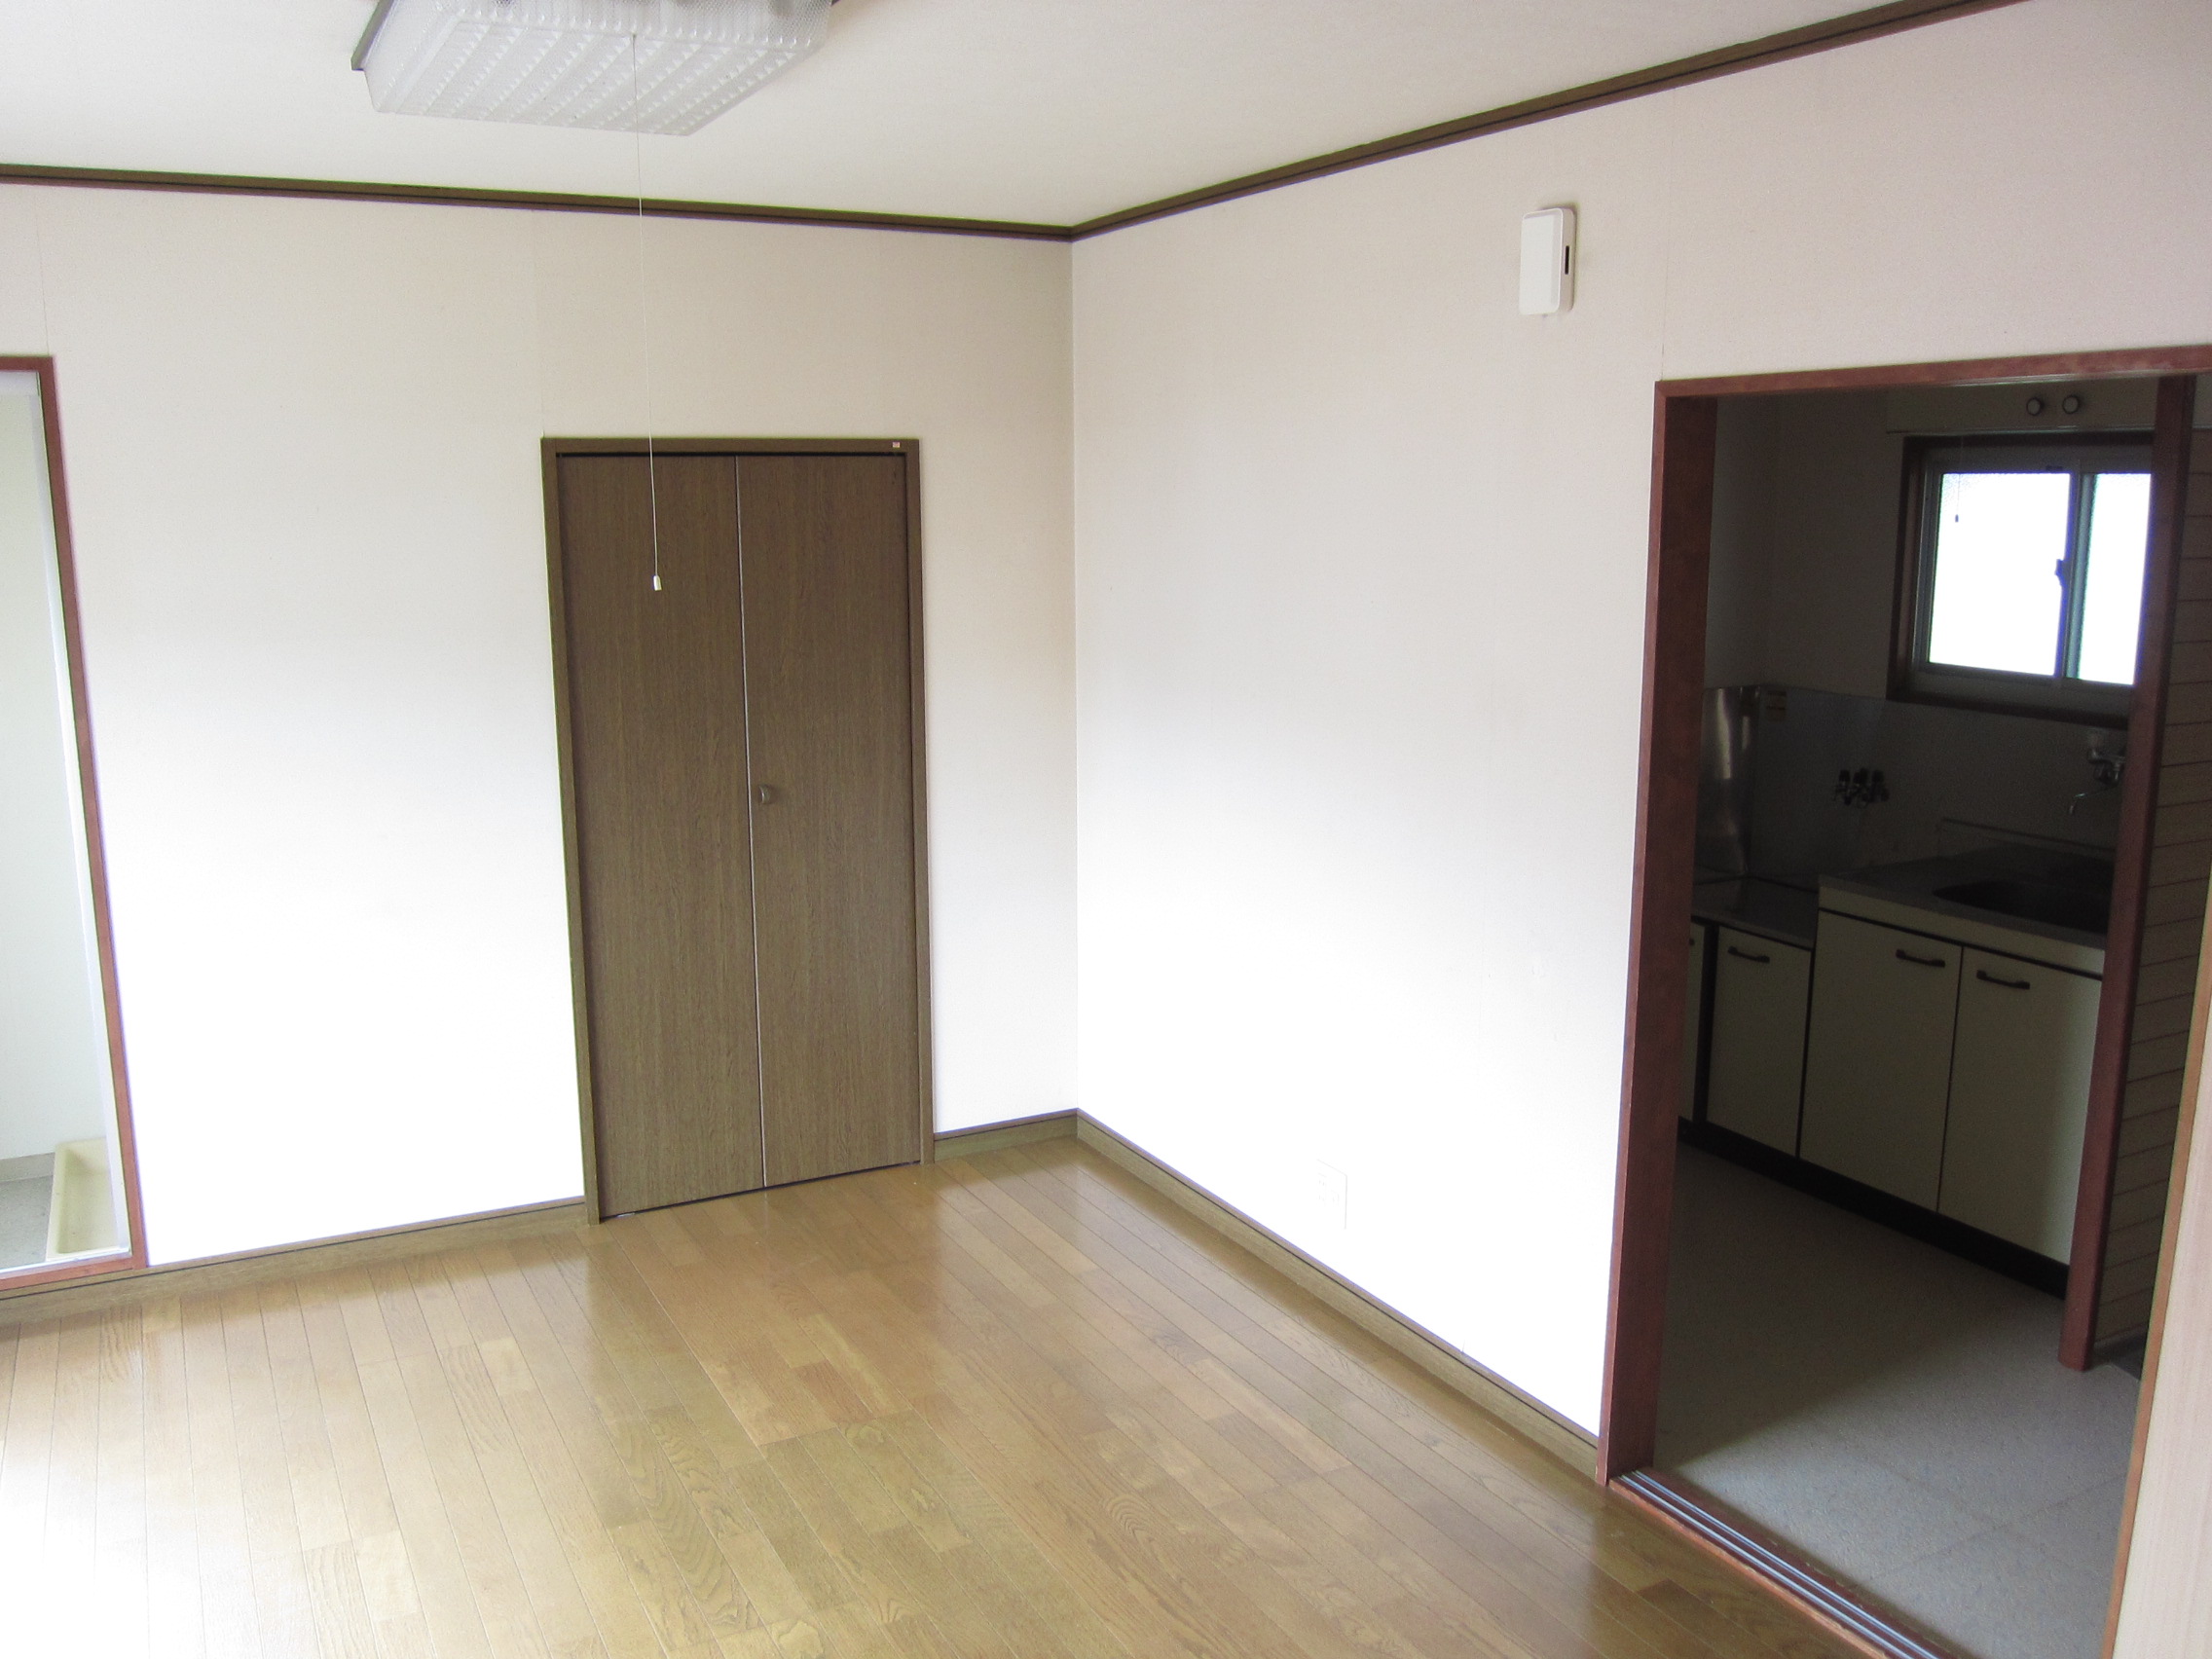 Living and room. It is taken from a different angle of Western-style.